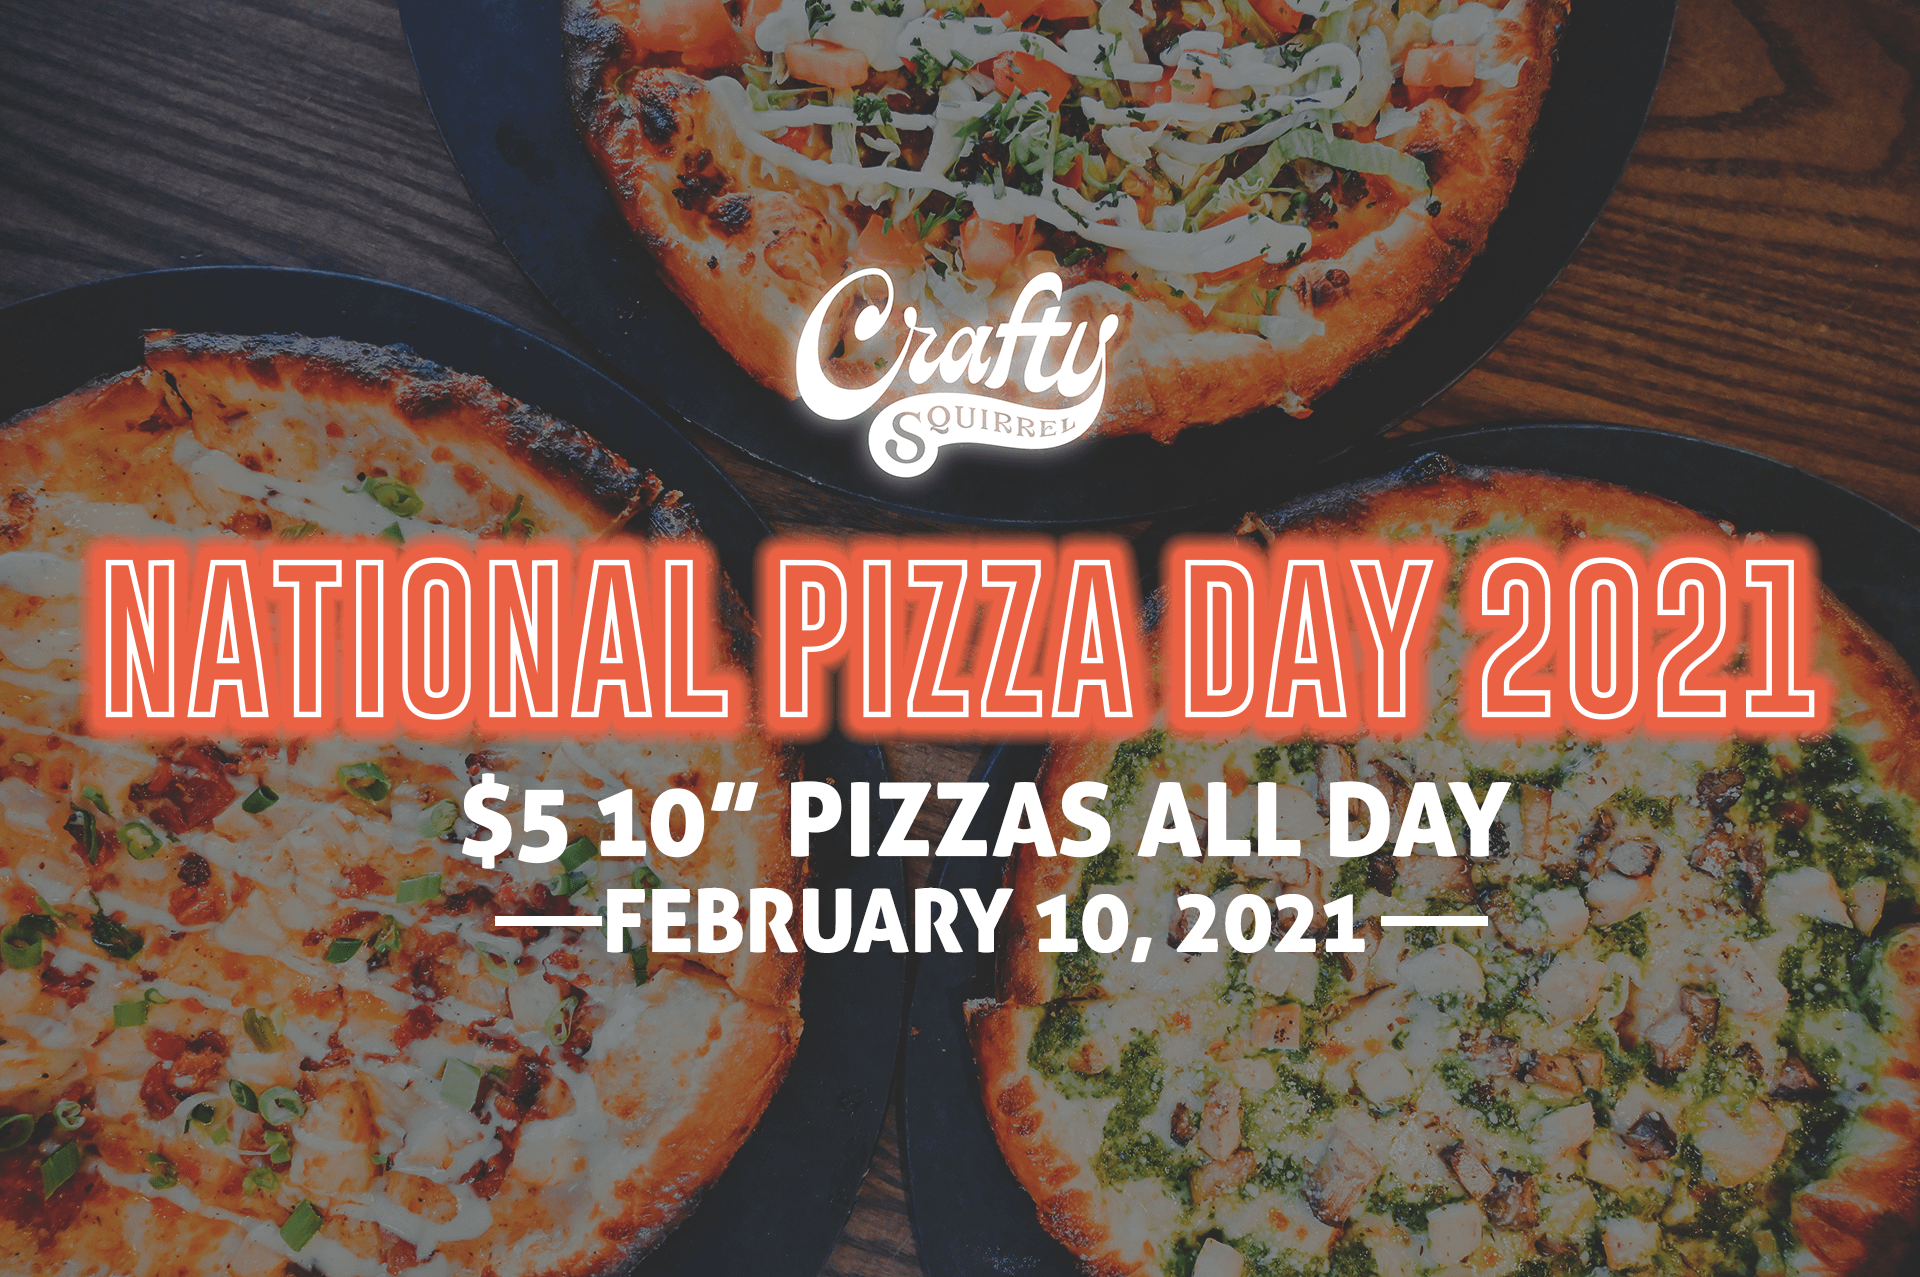 National Pizza Day at the Crafty Squirrel